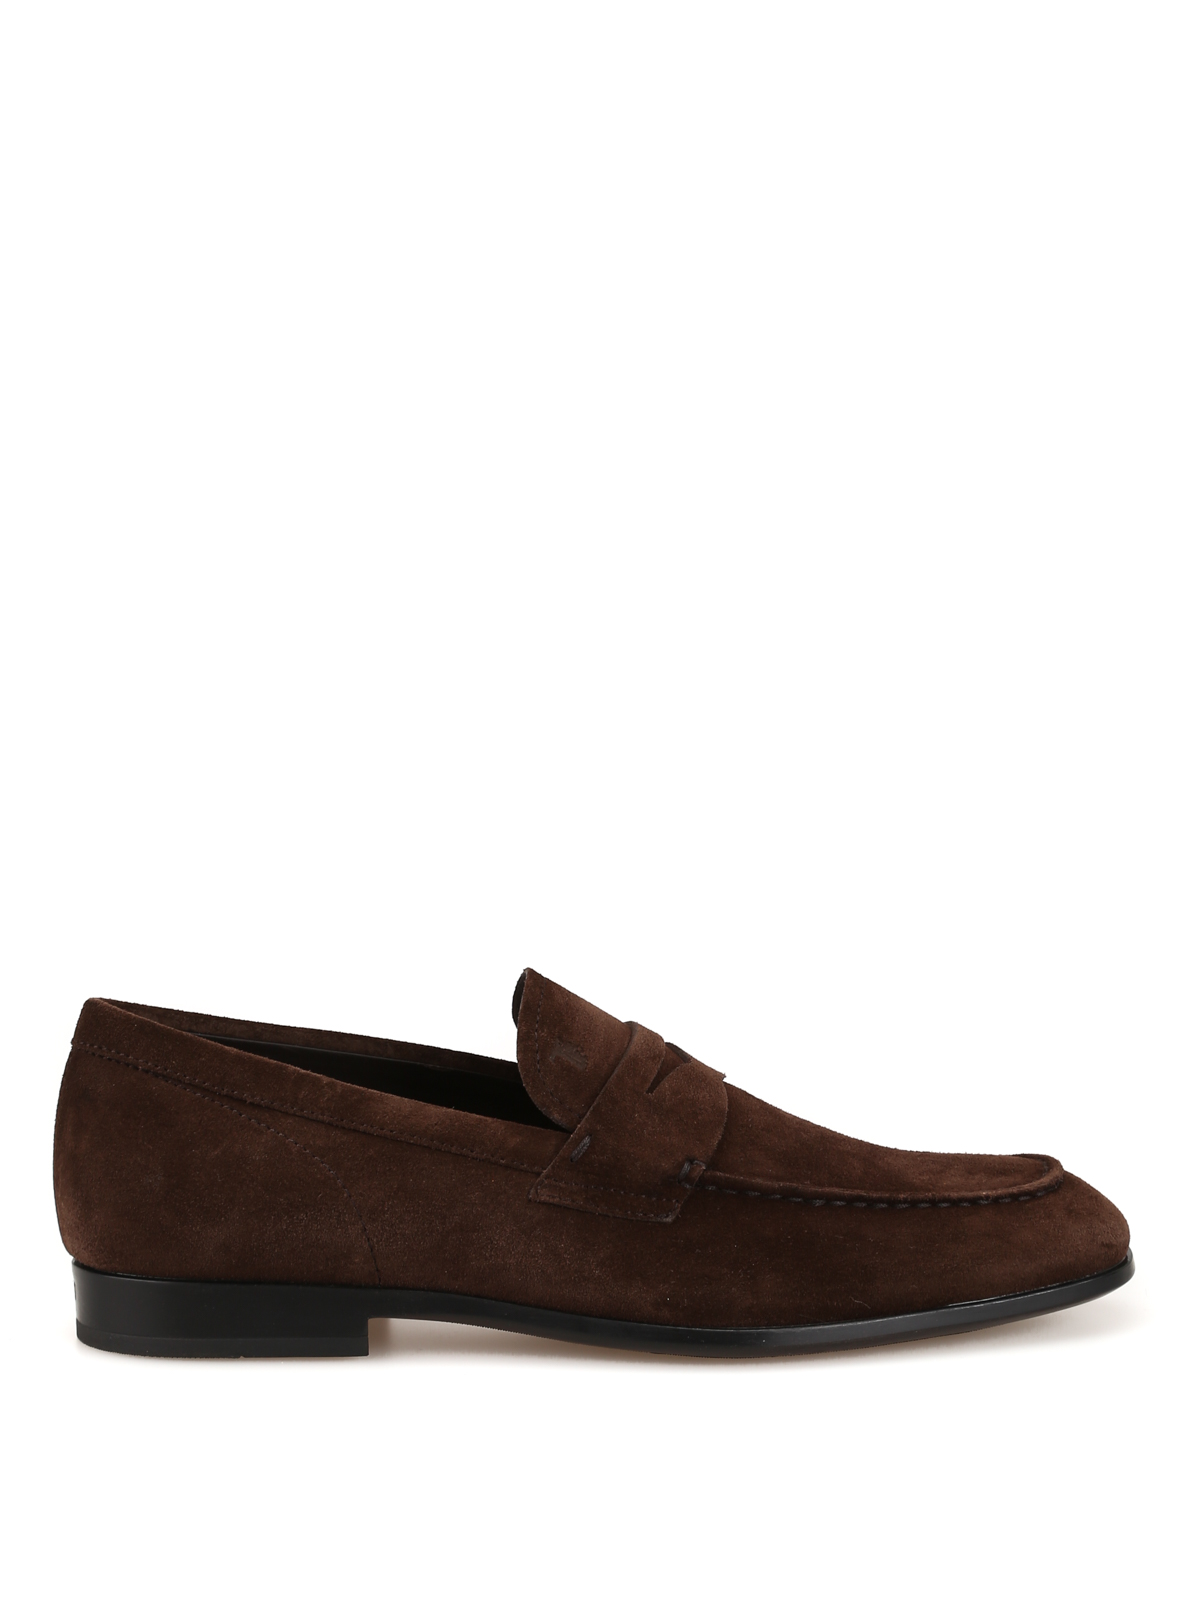 Loafers & Slippers Tod'S - Dark brown suede square toe loafers ...